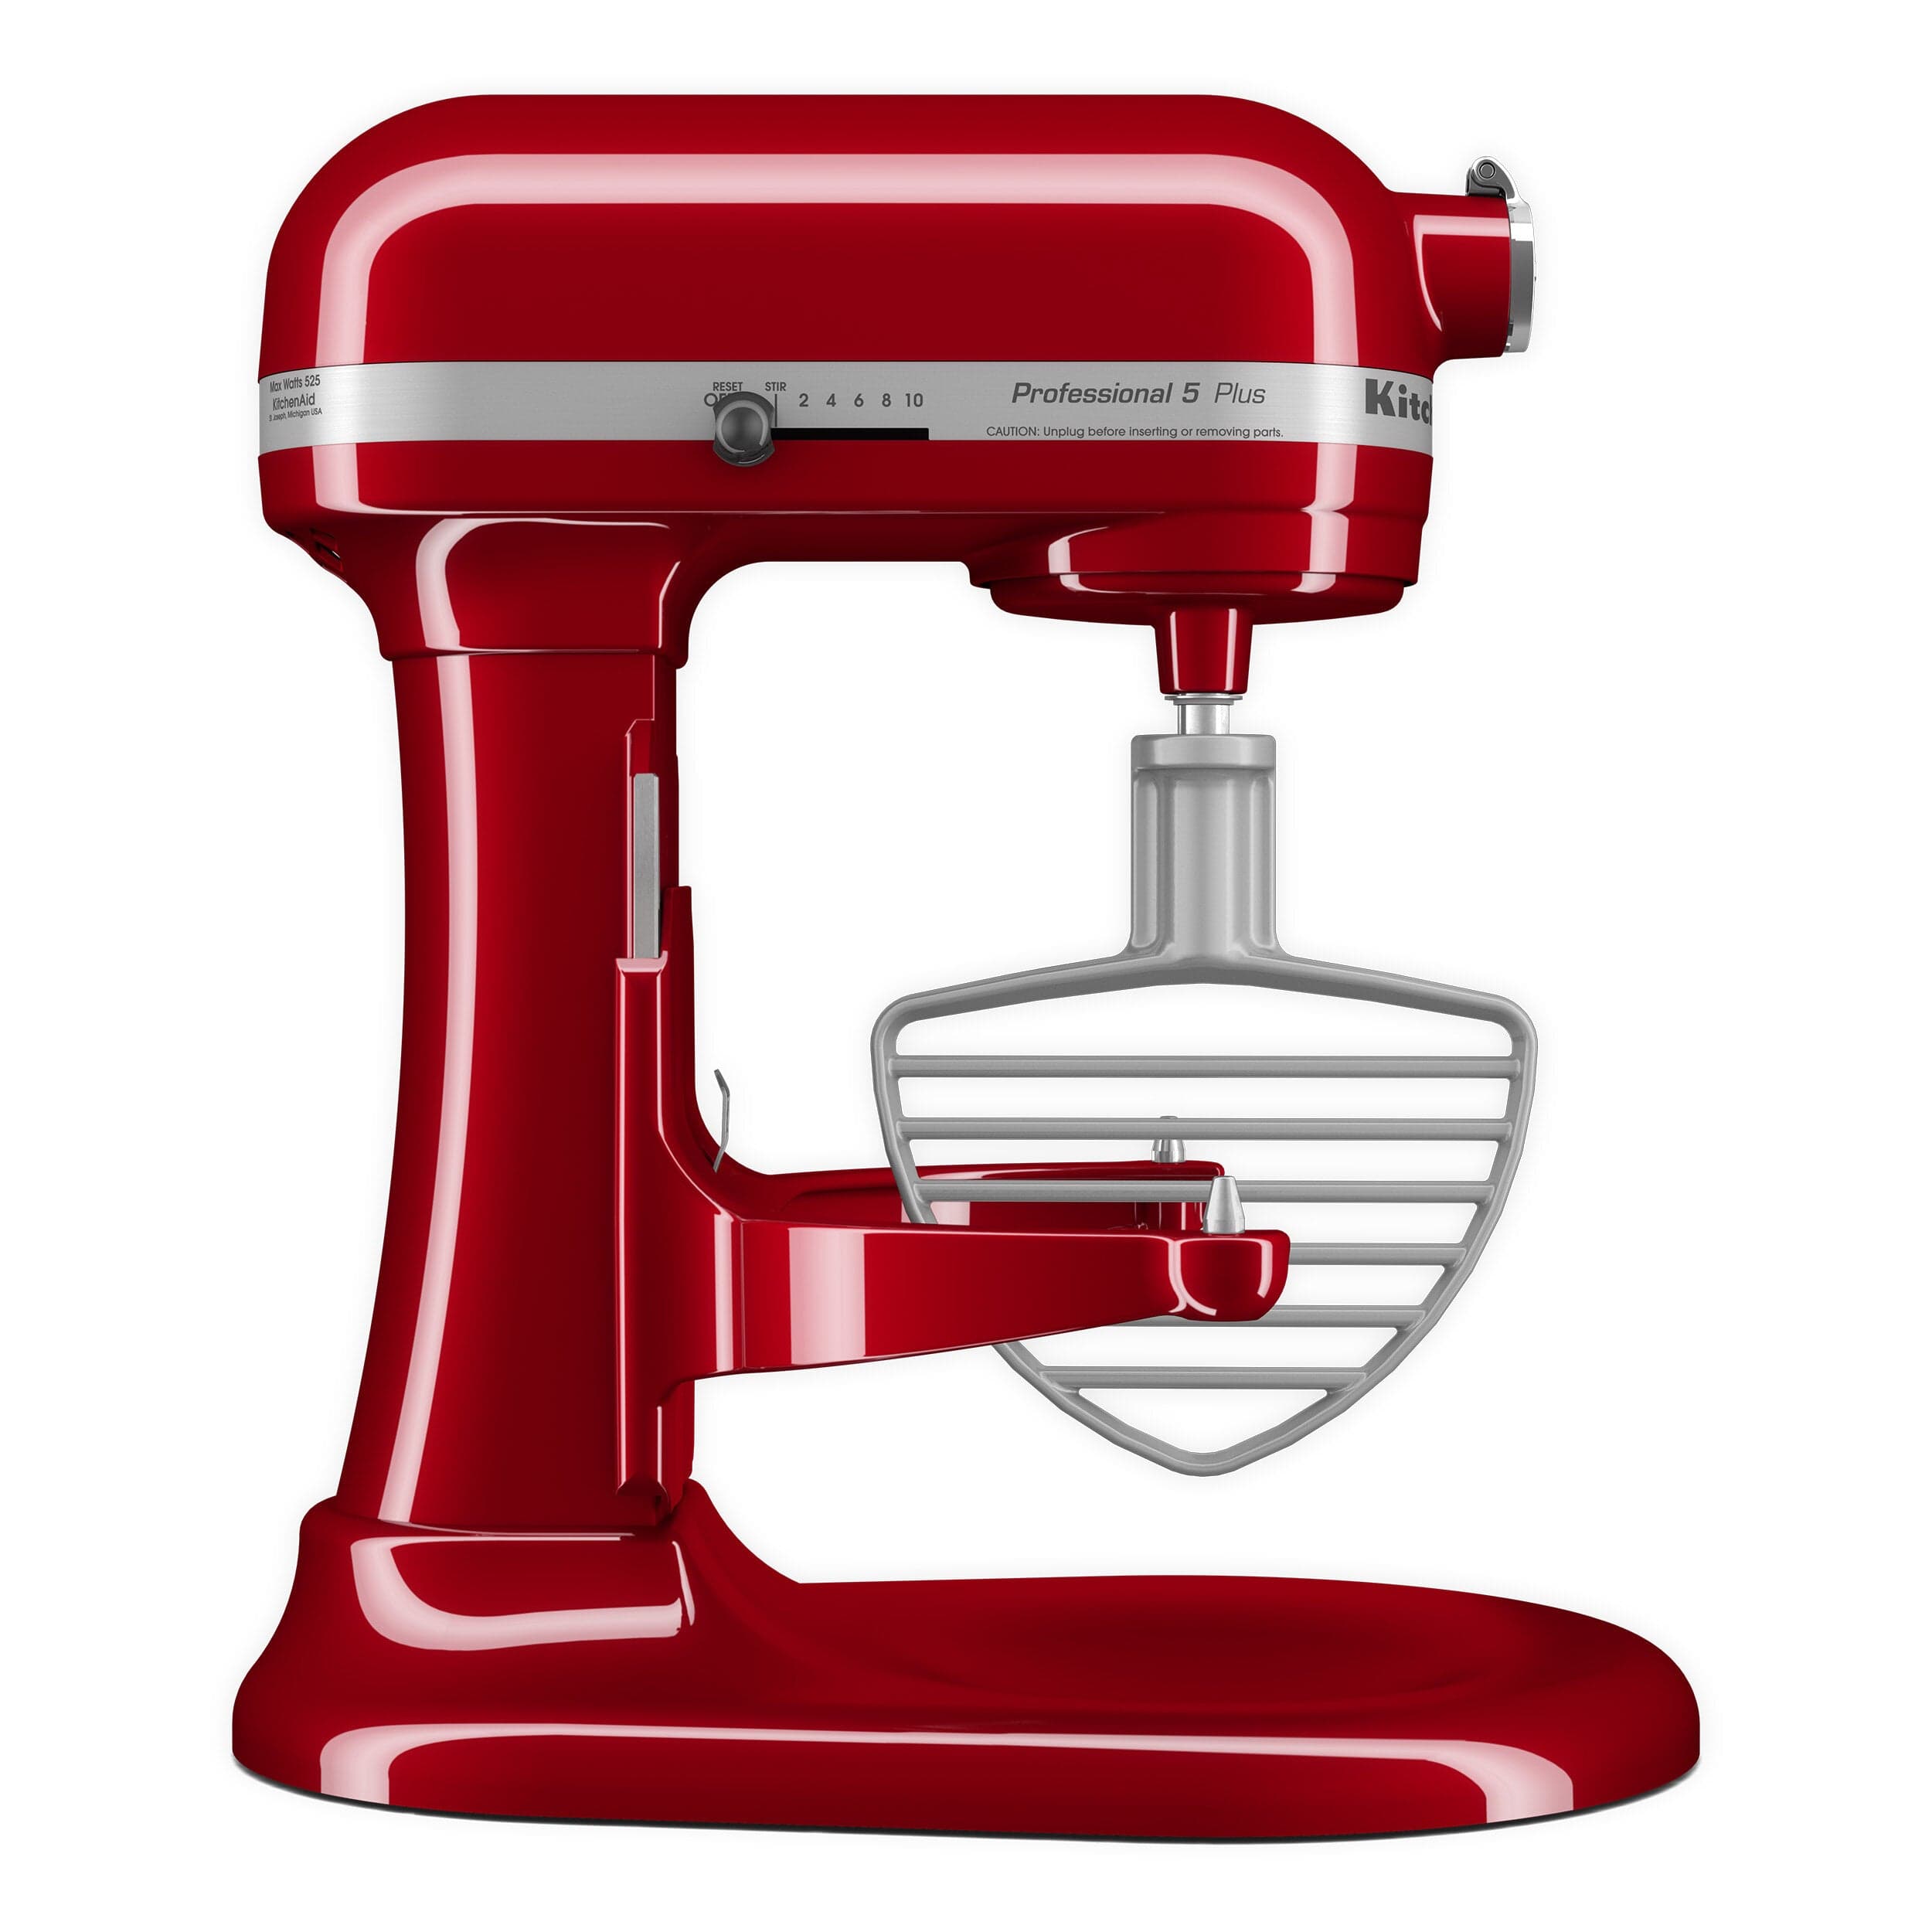 Kitchenaid Pastry Beater for Bowl-Lift Stand Mixers - KSMPB7 New